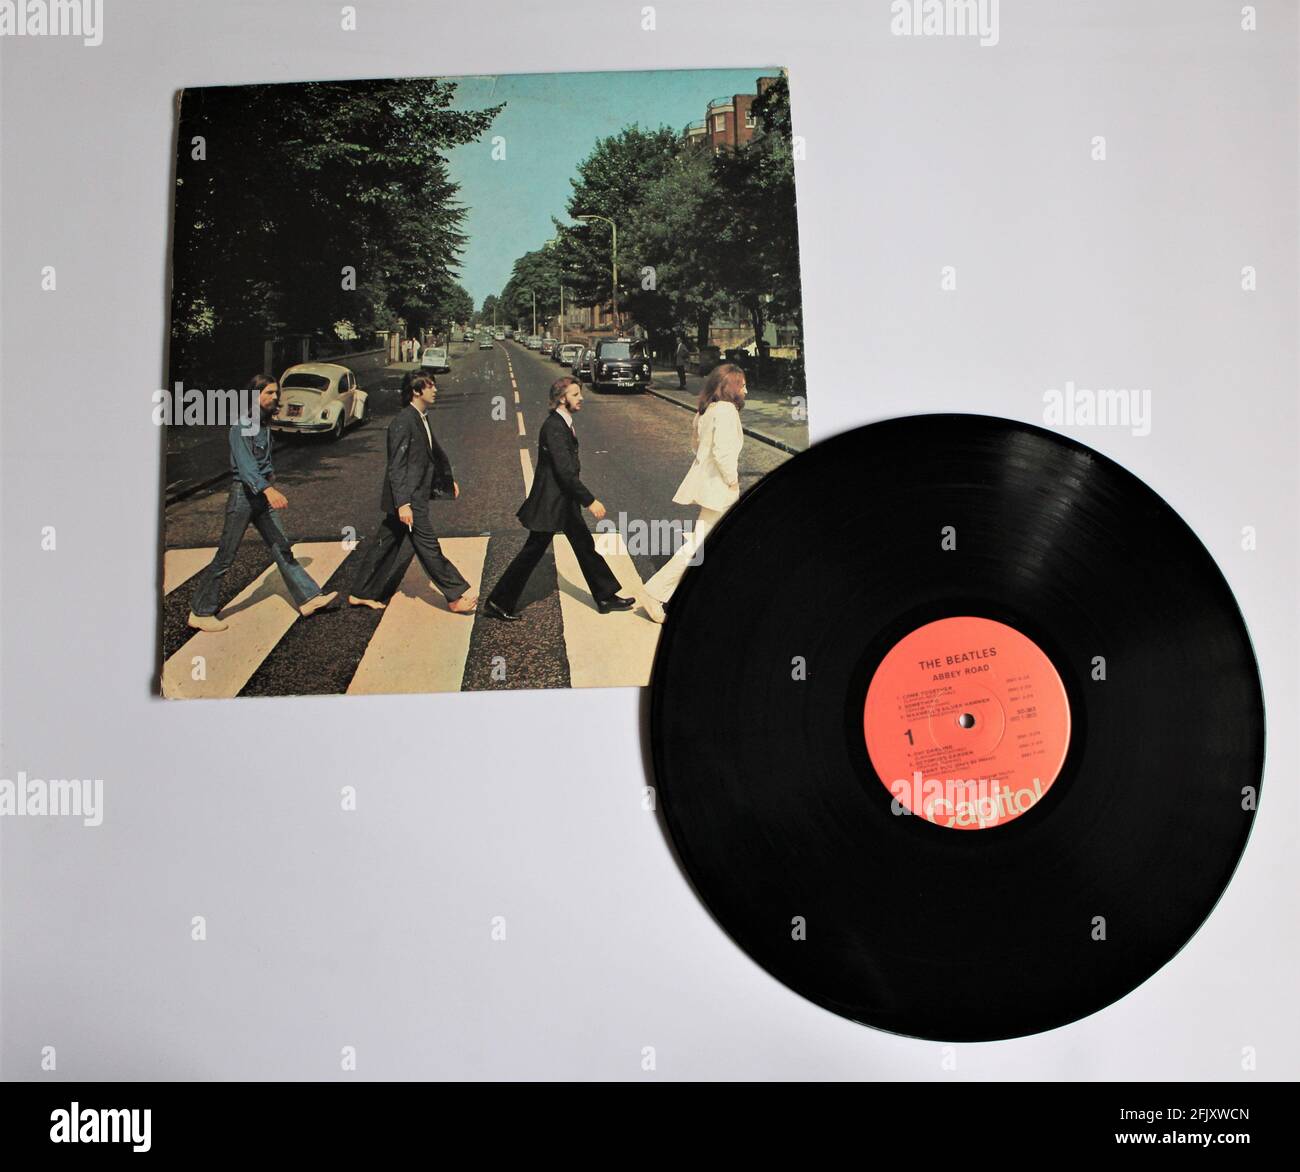 Abbey road album cover hi-res and images - Alamy